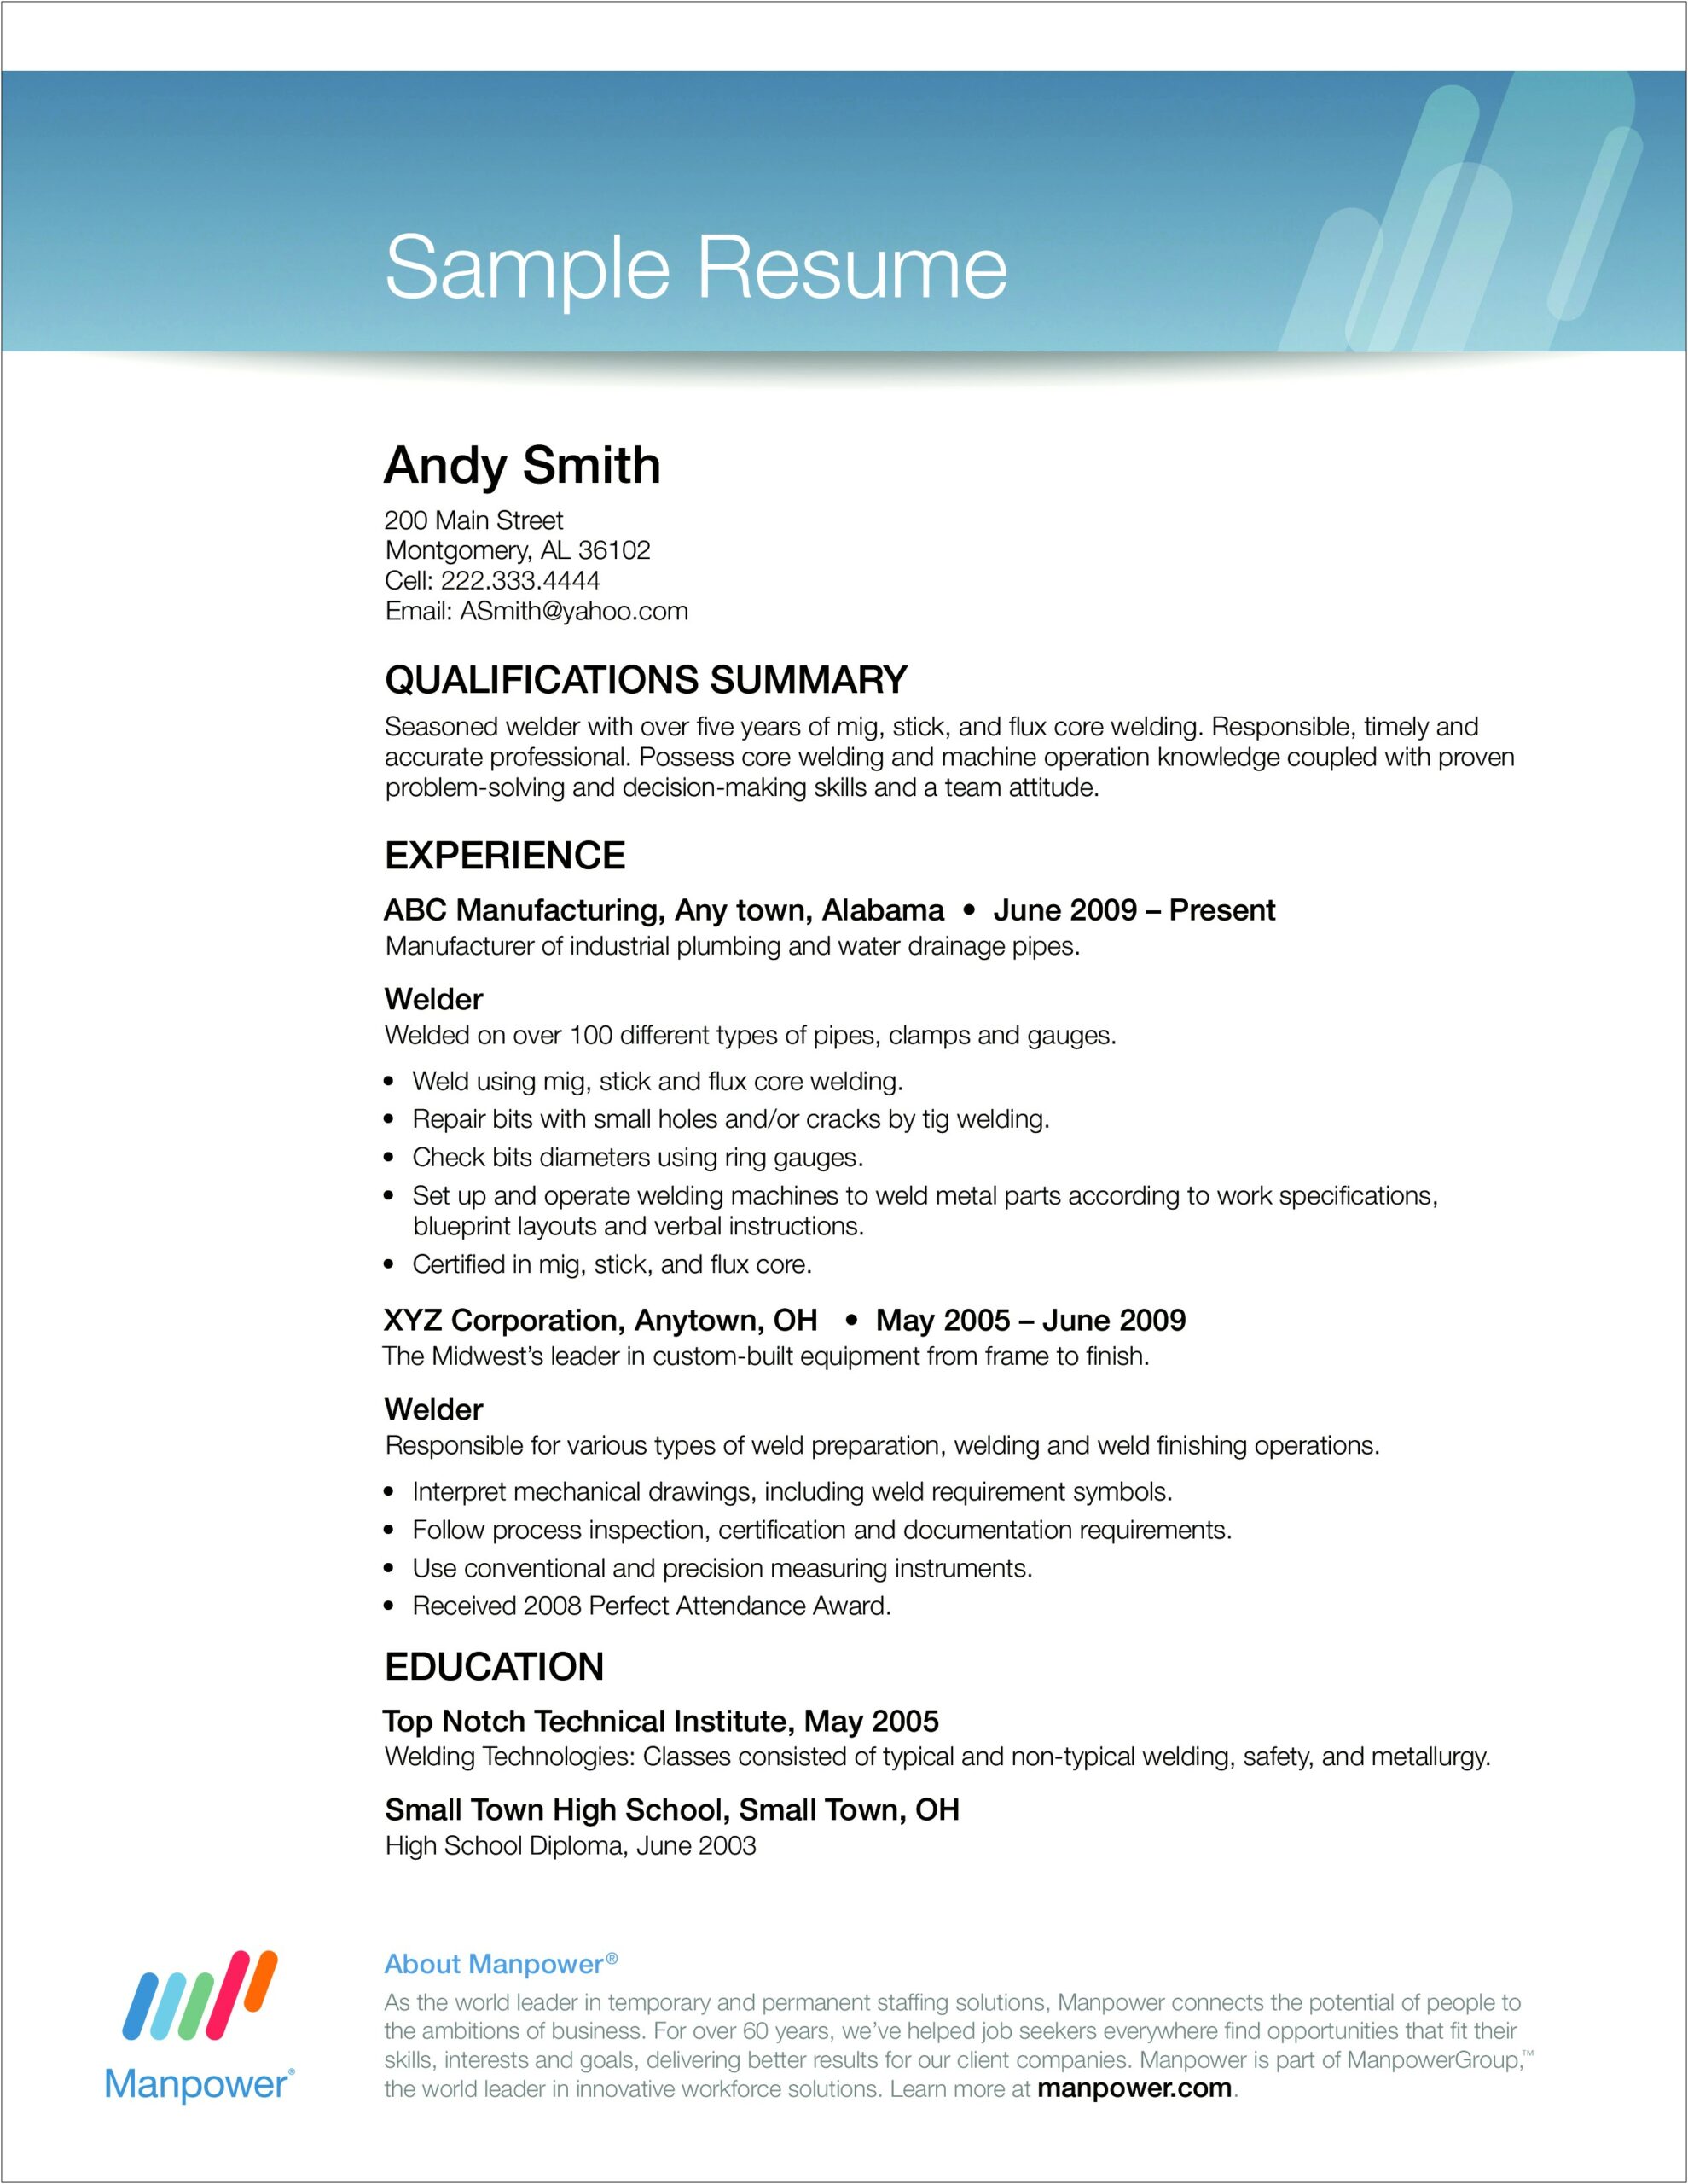 Best Resume Format For Interview